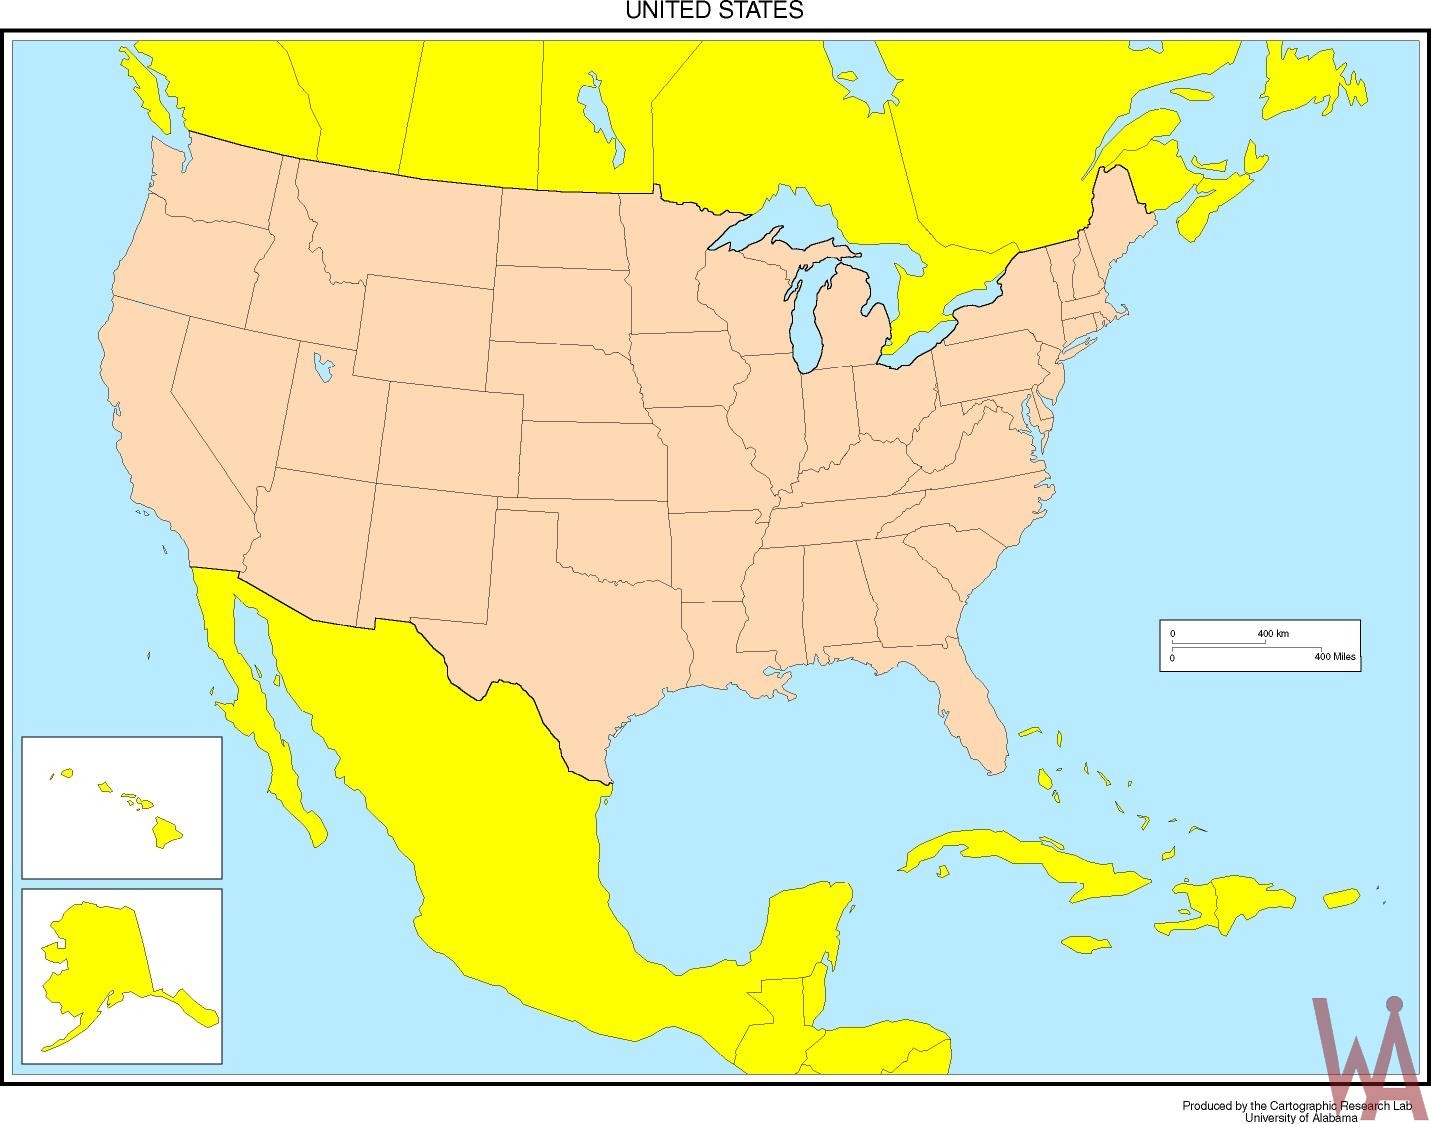 blank united states and mexico map Blank Outline Map Of The Usa With Mexico Whatsanswer blank united states and mexico map